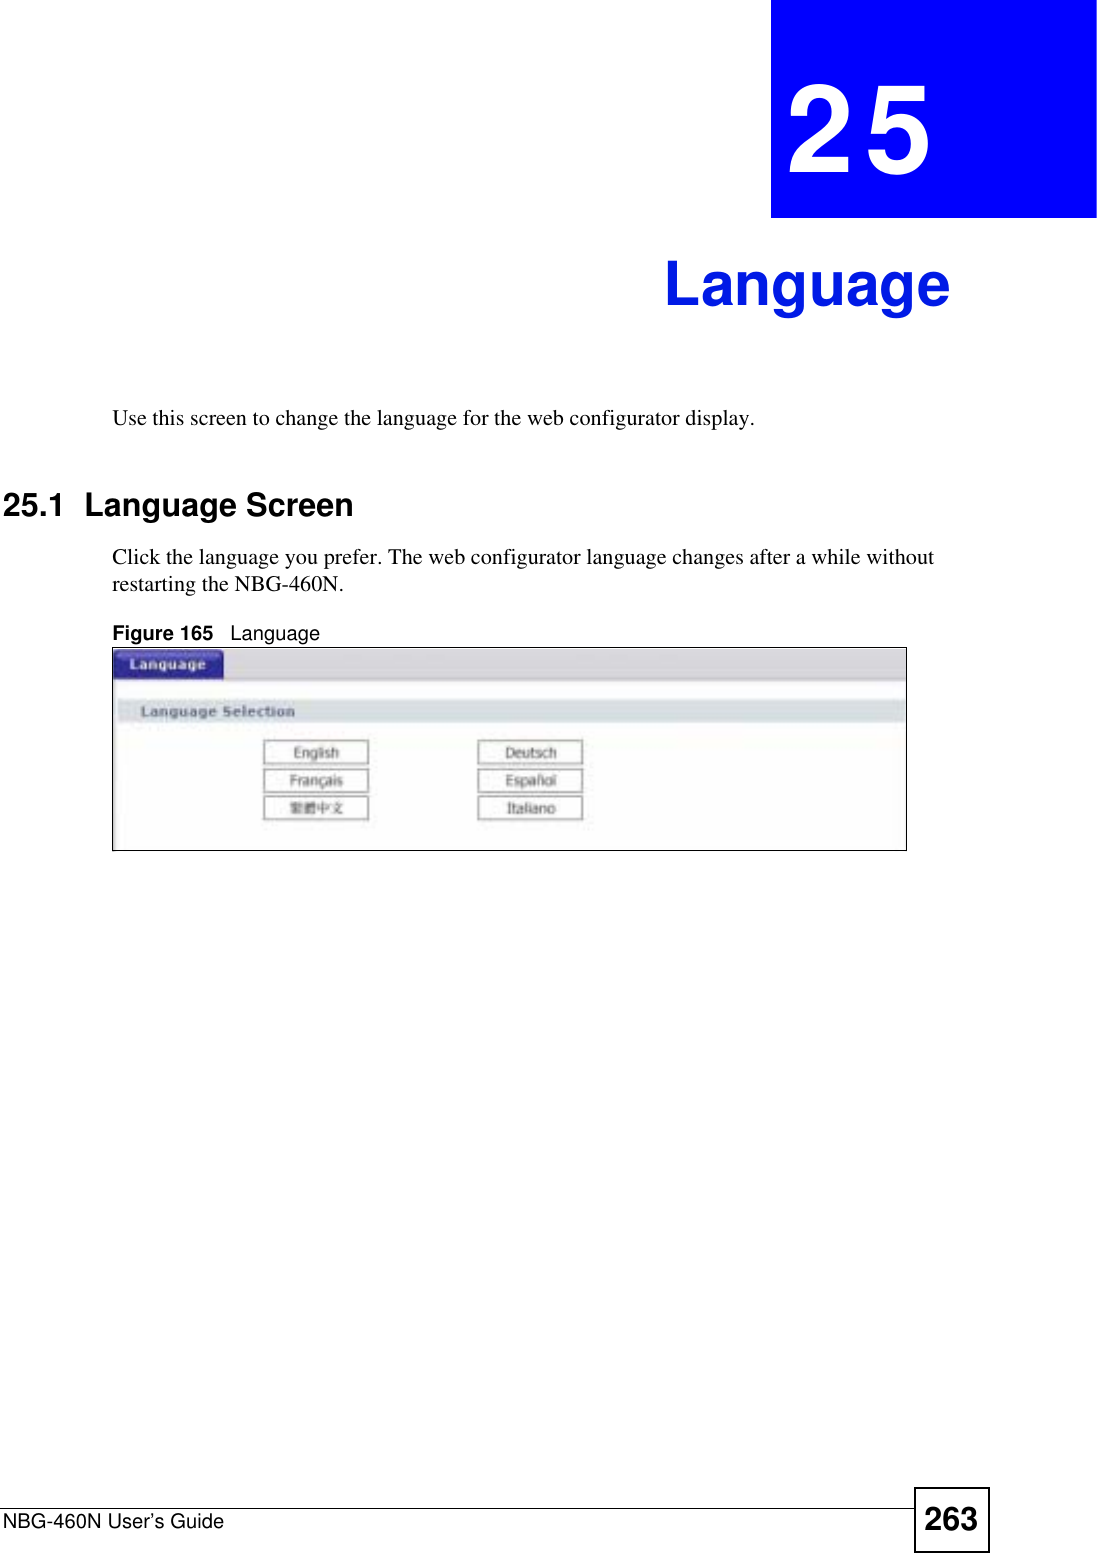 NBG-460N User’s Guide 263CHAPTER 25LanguageUse this screen to change the language for the web configurator display.25.1  Language ScreenClick the language you prefer. The web configurator language changes after a while without restarting the NBG-460N.Figure 165   Language